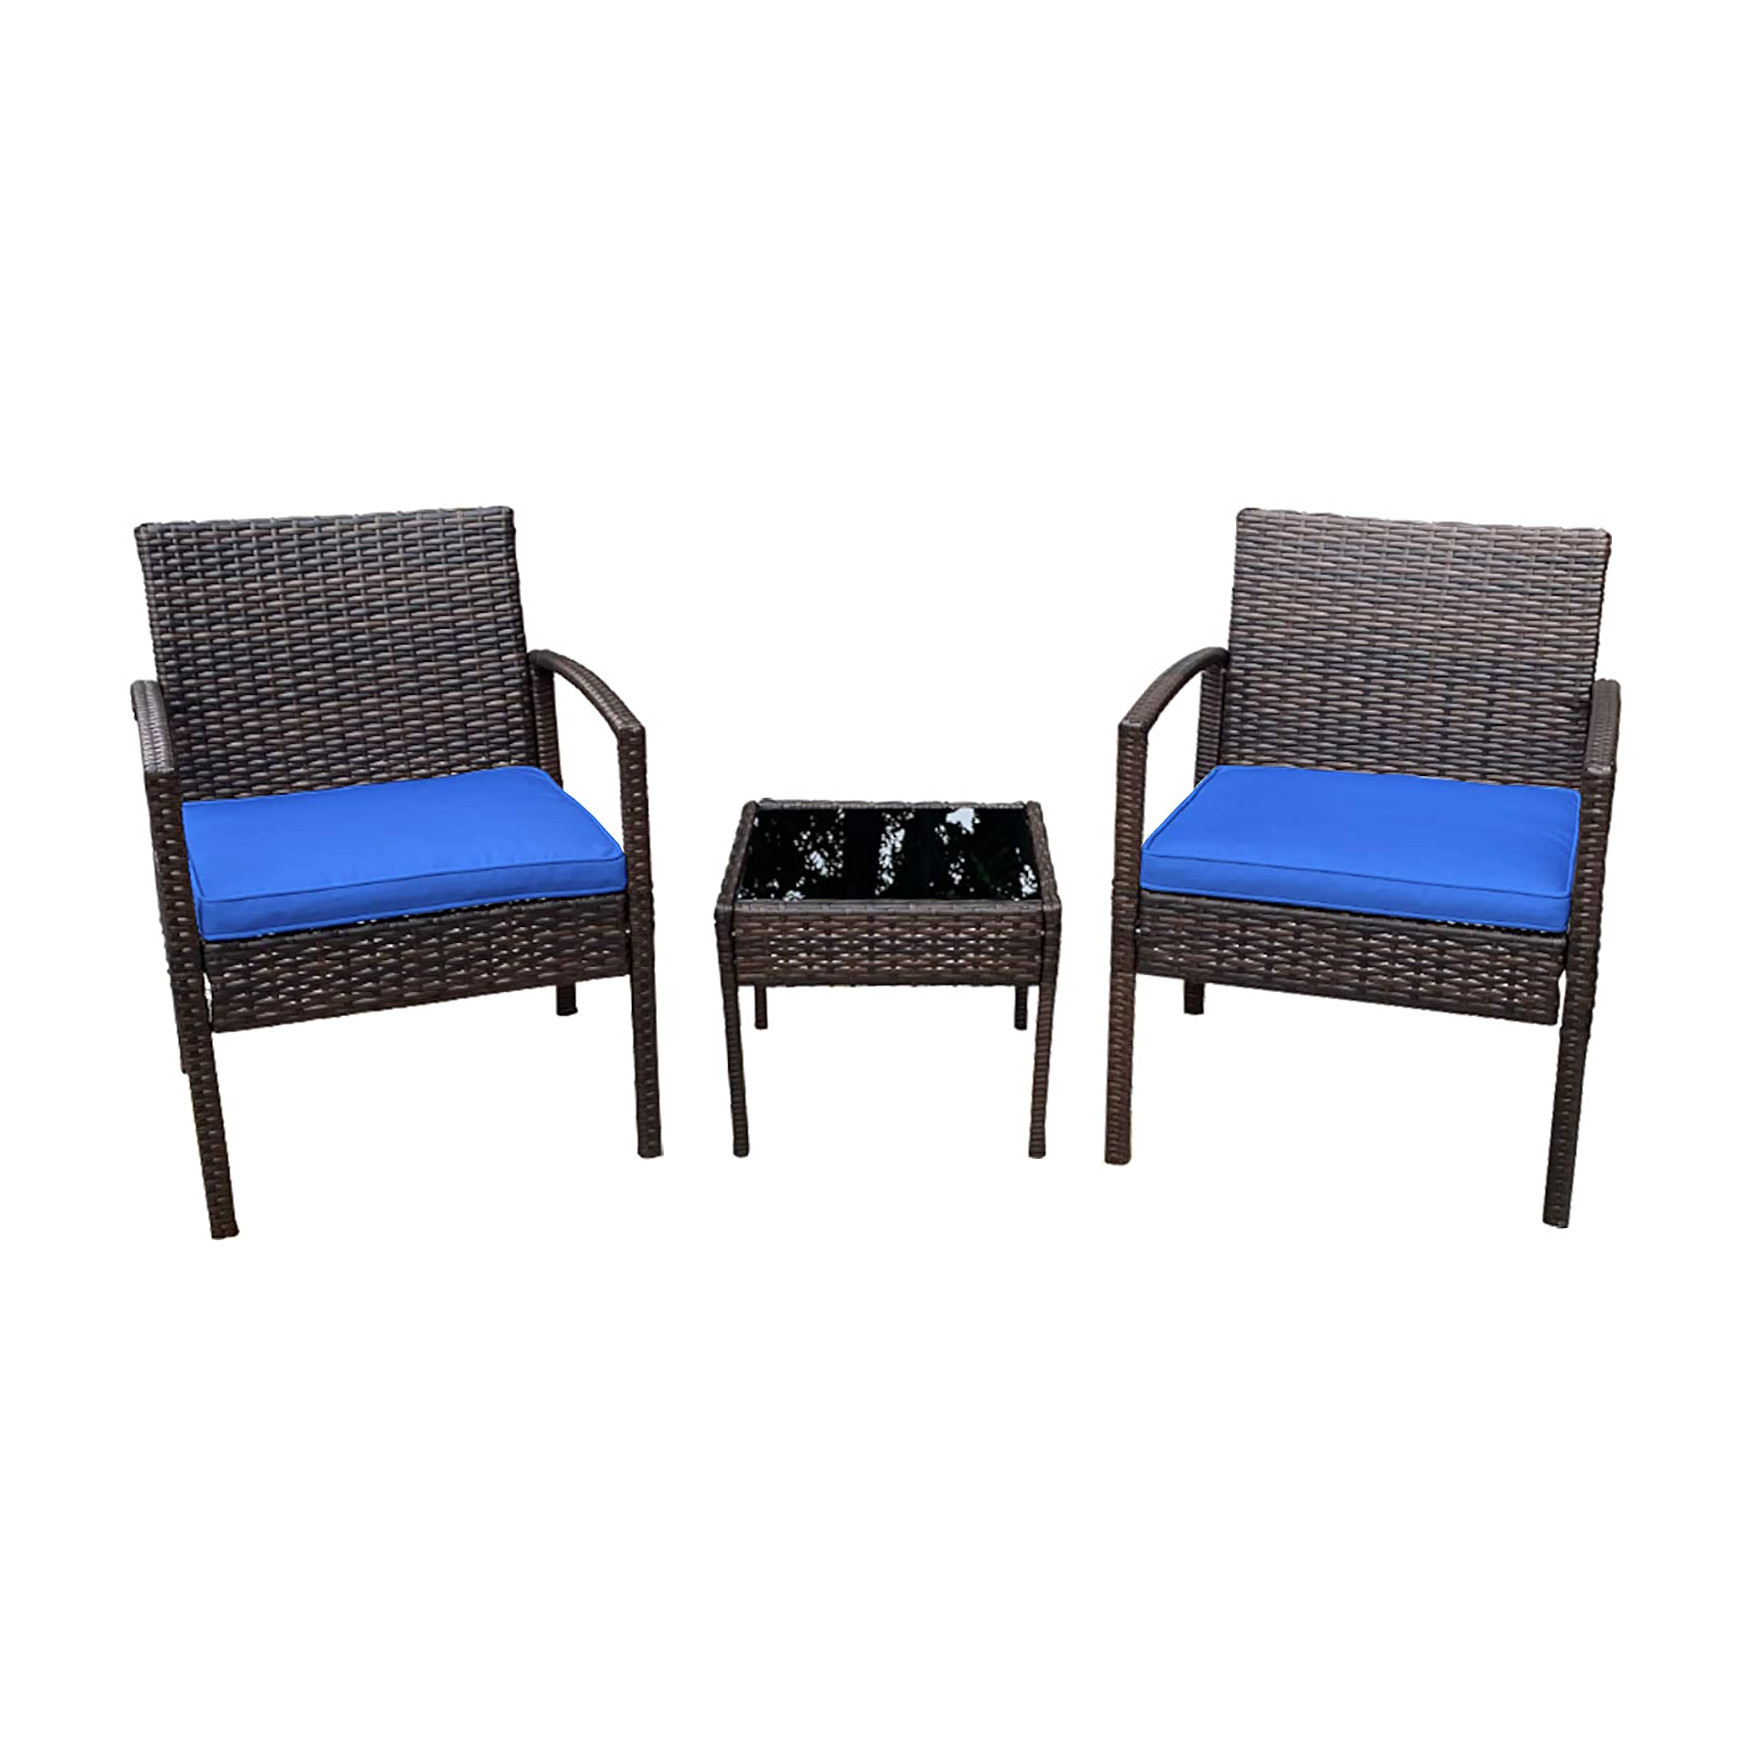  Terrace Balcony Poly Rattan Wicker Bistro Table And Chairs Set Manufactures